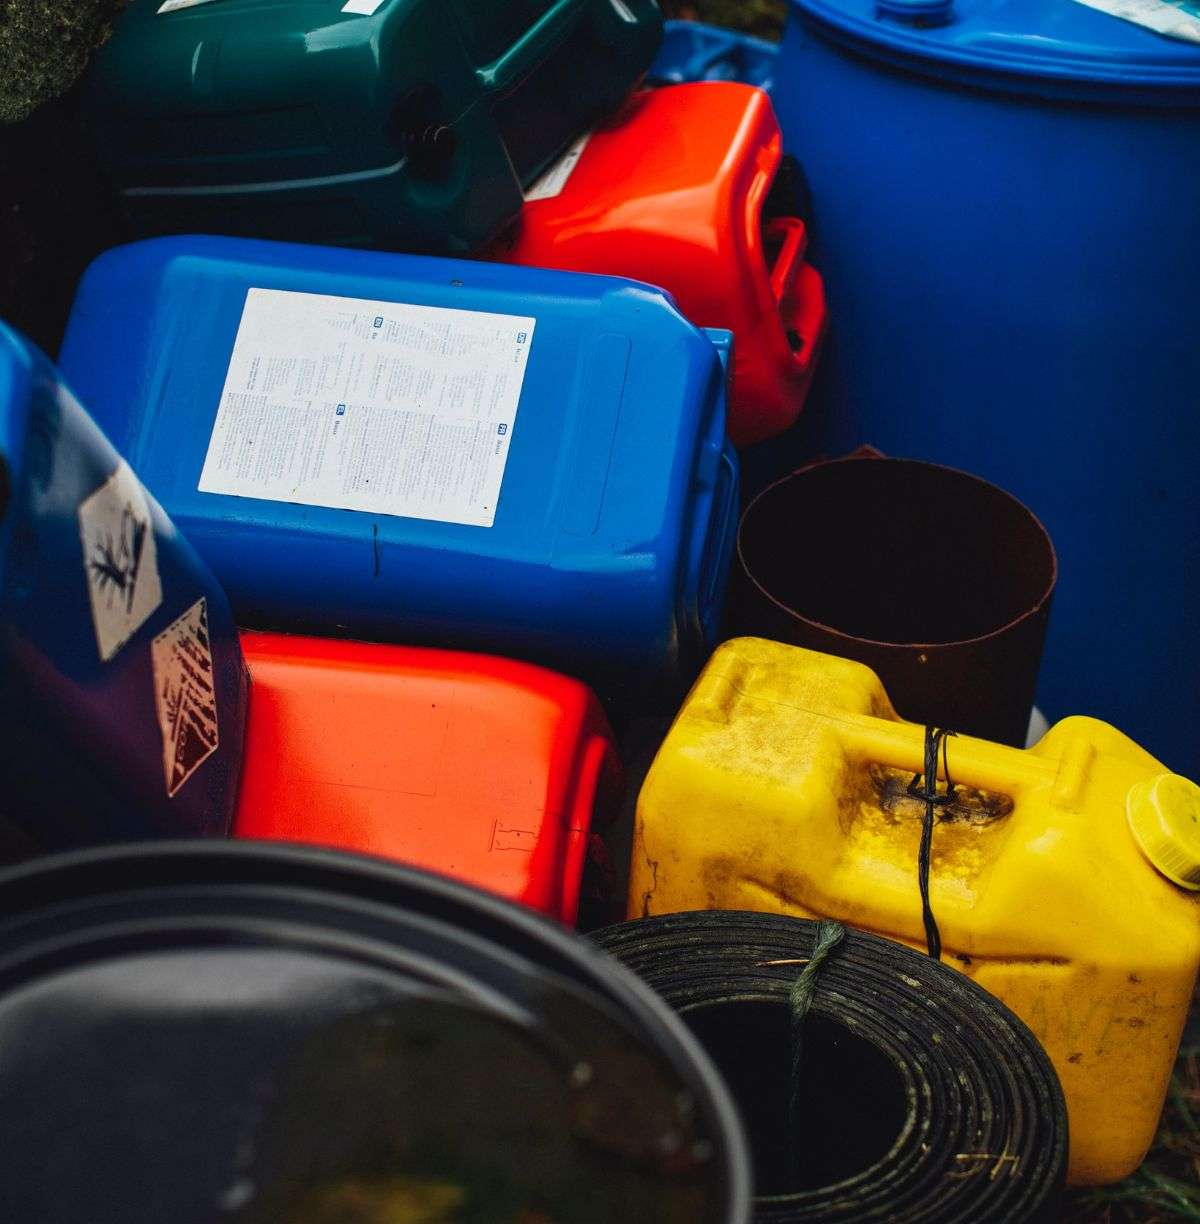 Gas and oil cans piled amidst other hazardous material